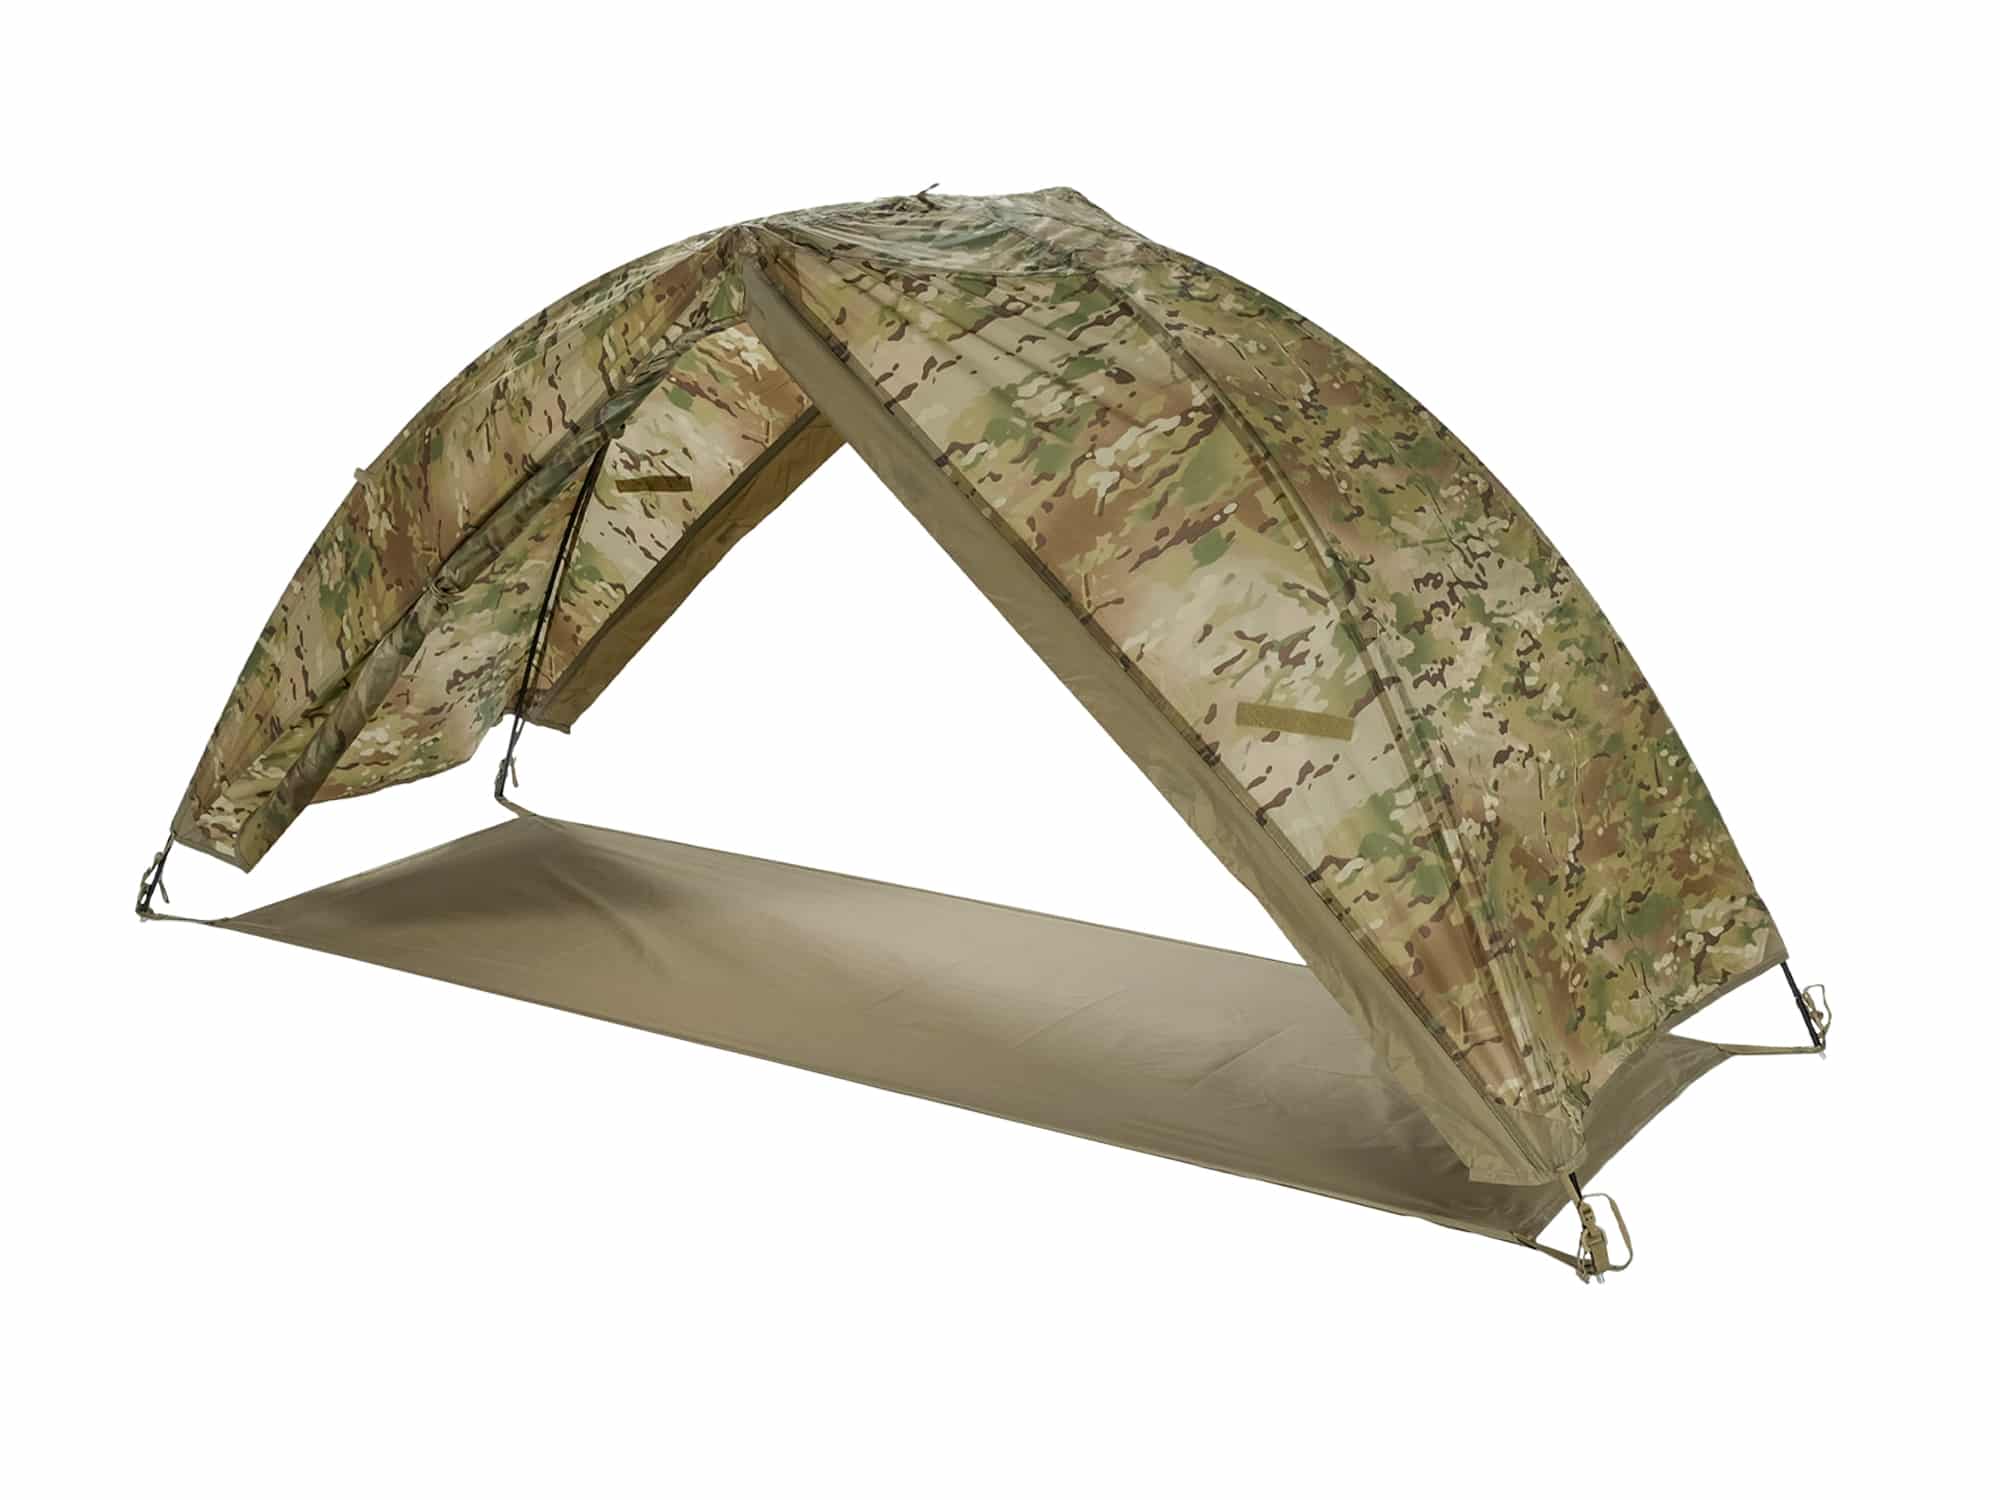 FIDO 1 Individual Shelter System – LiteFighter